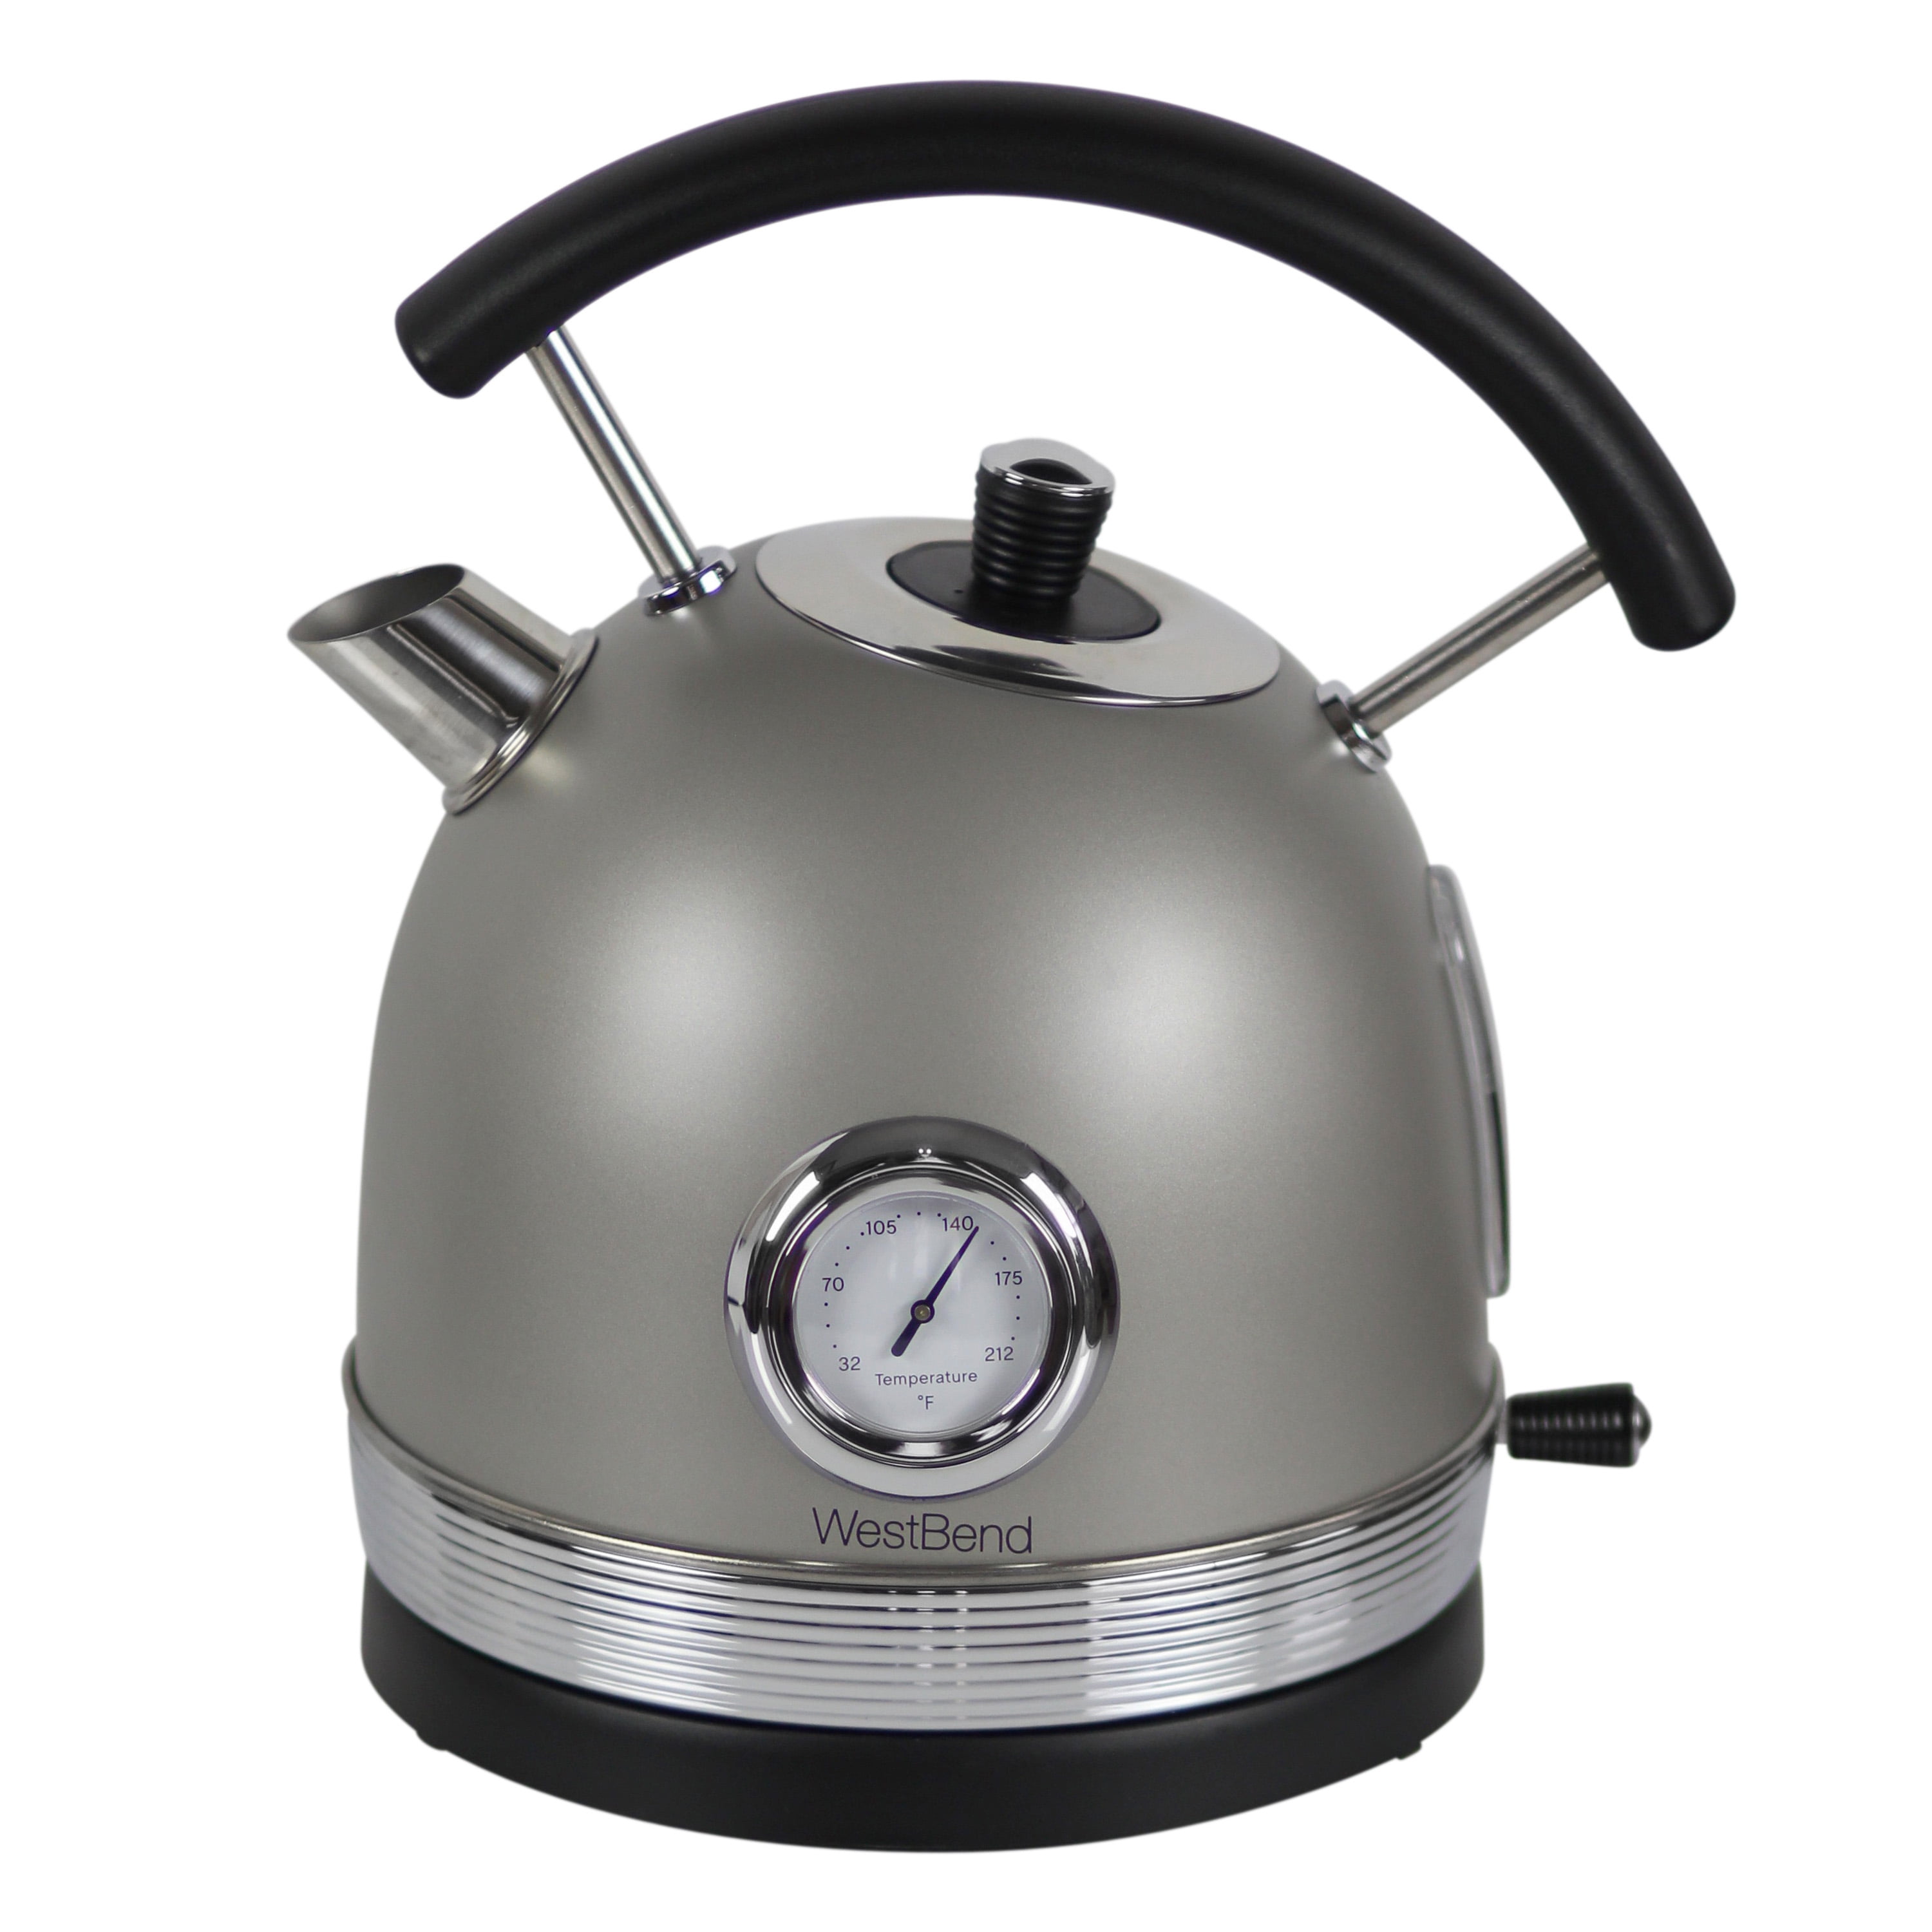 West Bend Electric Kettle Retro Styled Stainless Steel 1500 Watts Review,  Beautiful design, well mad 